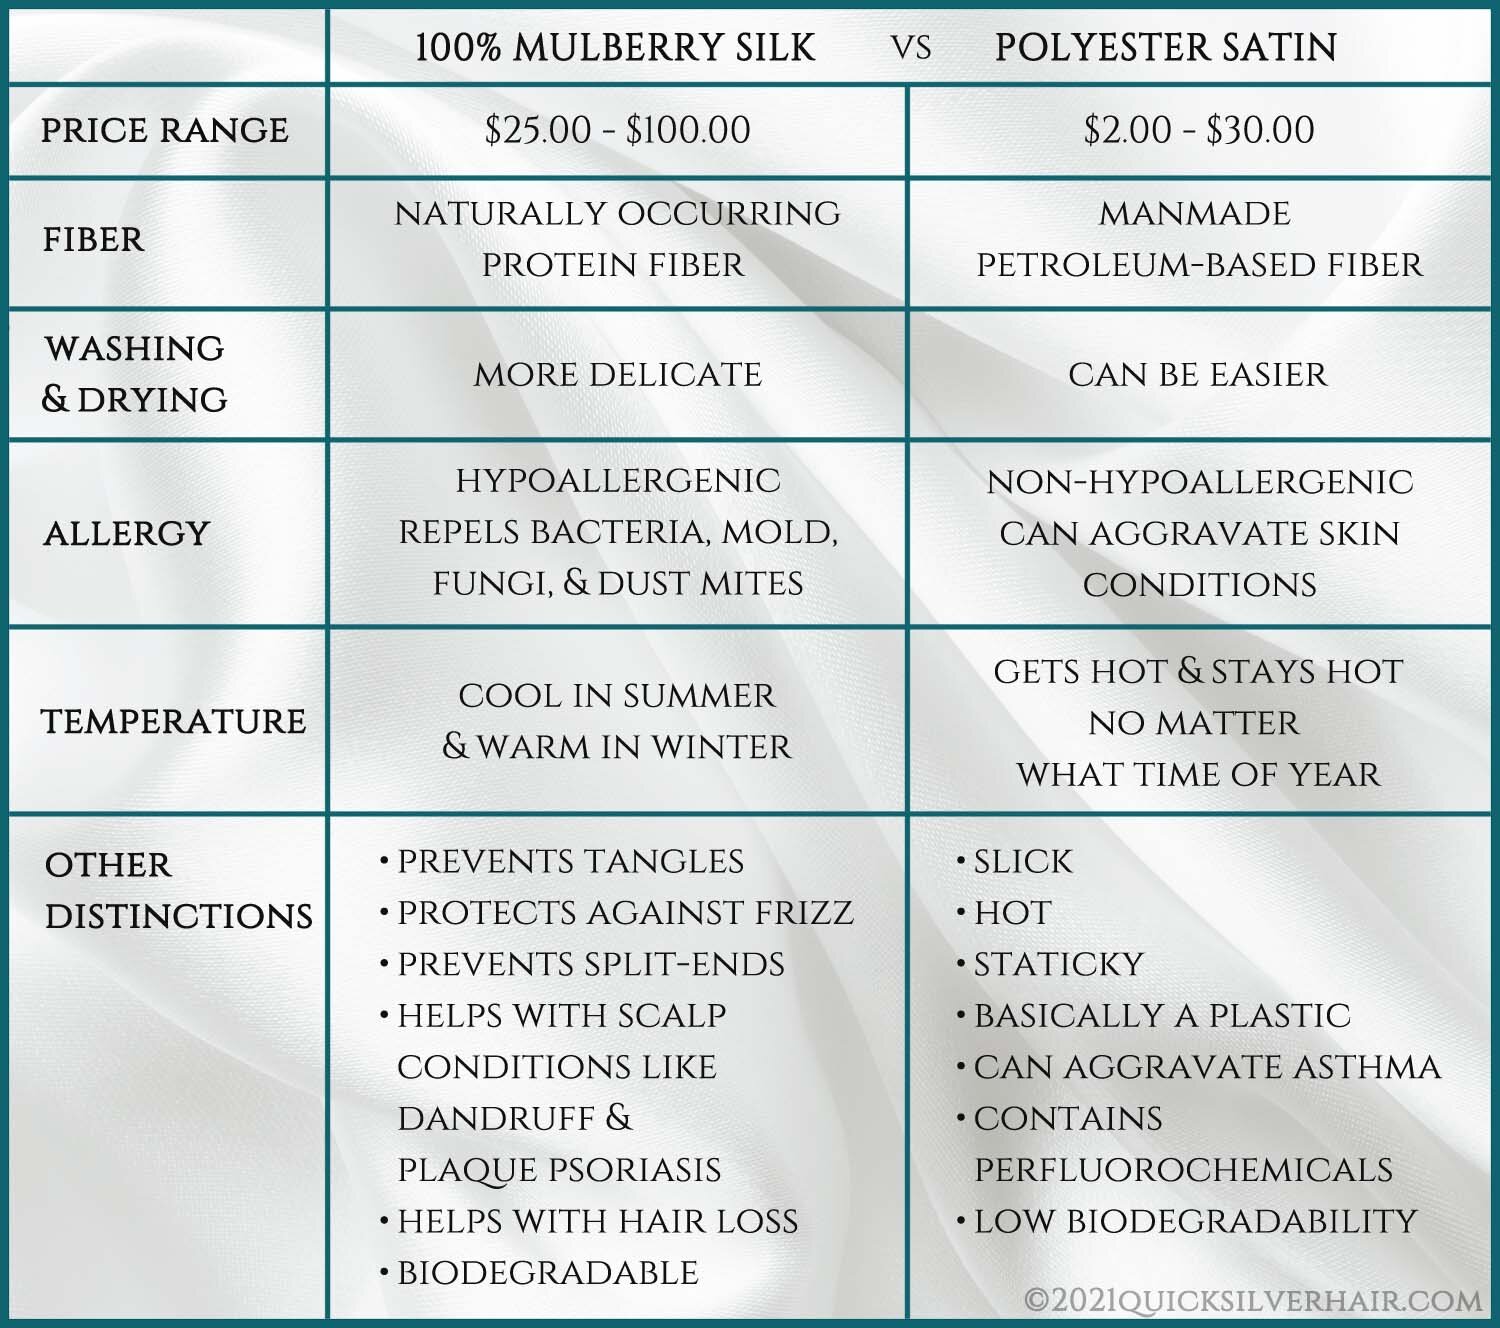 Chart wording: 100% Mulberry Silk vs Polyester Satin price range, silk: $25.00 - $100.00, poly: $2.00 - $30.00 fiber, silk: naturally occurring protein fiber, poly: manmade petroleum-based fiber washing & drying, silk is more delicate, and poly can be easier allergy, silk is hypoallergenic repels bacteria, mold, fungi, & dust mites, poly is non-hypoallergenic can aggravate skin conditions temperature, silk is cool in summer & warm in winter, poly gets hot & stays hot no matter what time of year other distinctions: Silk: prevents tangles, protects against frizz, prevents split-ends, helps with scalp conditions like dandruff & plaque psoriasis, helps with hair loss, biodegradable. Poly: slick, hot, staticky, basically a plastic, can aggravate asthma, contains perfluorochemicals, low biodegradability